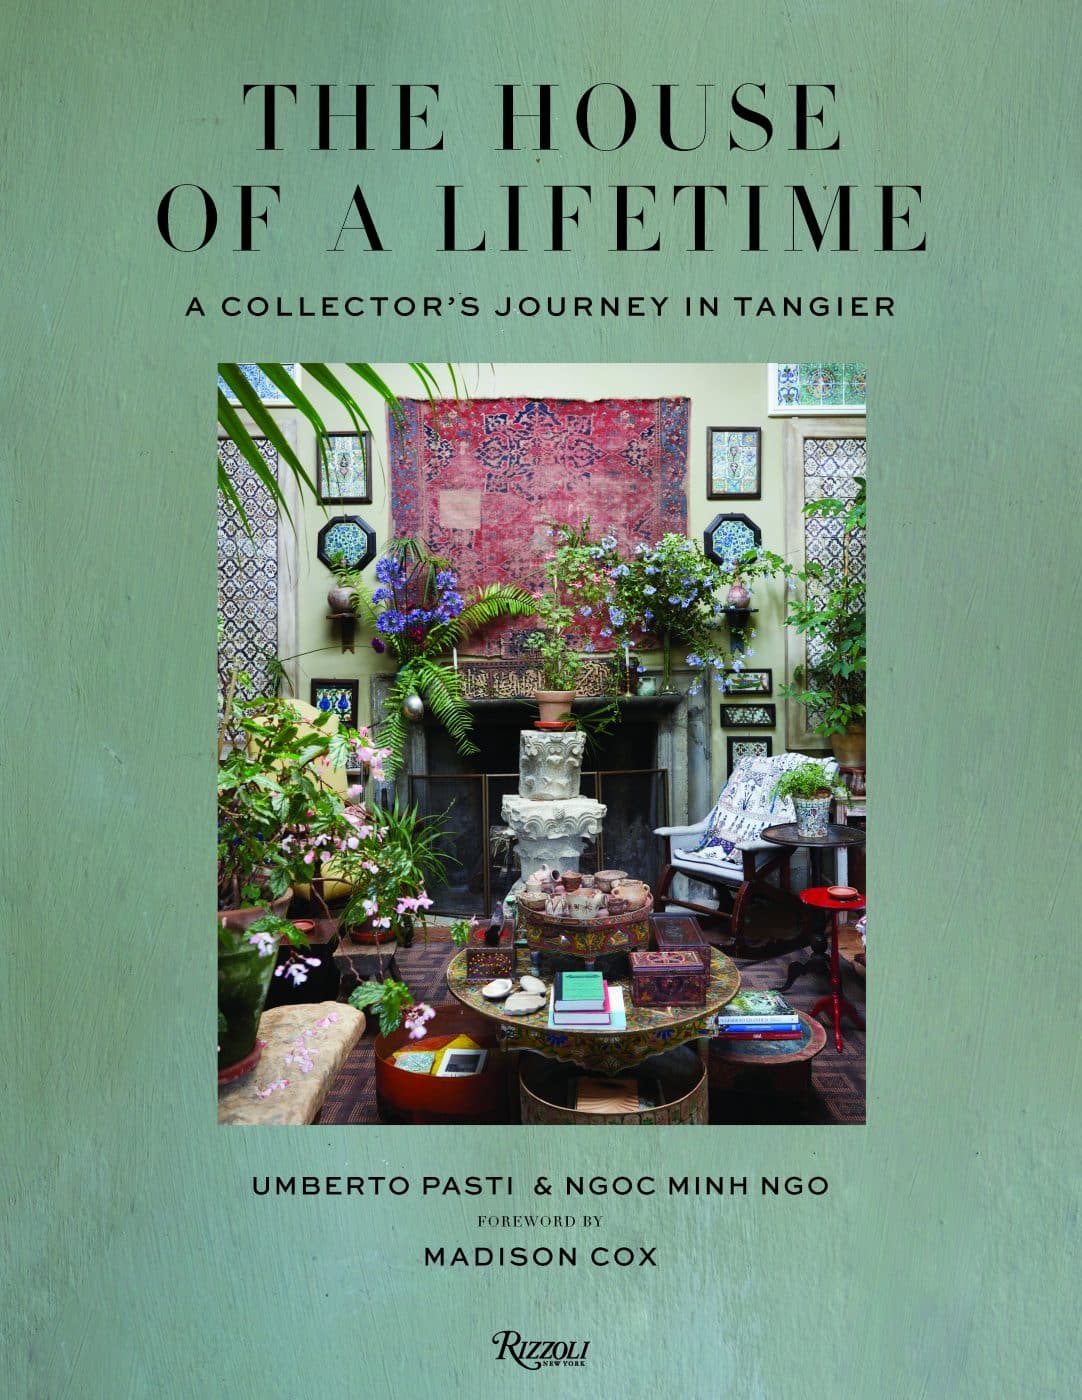 Cover for the Rizzoli book The House of a Lifetime: A Collector's Journey in Tangier Morocco home of Umberto Pasti and Stephan Janson 